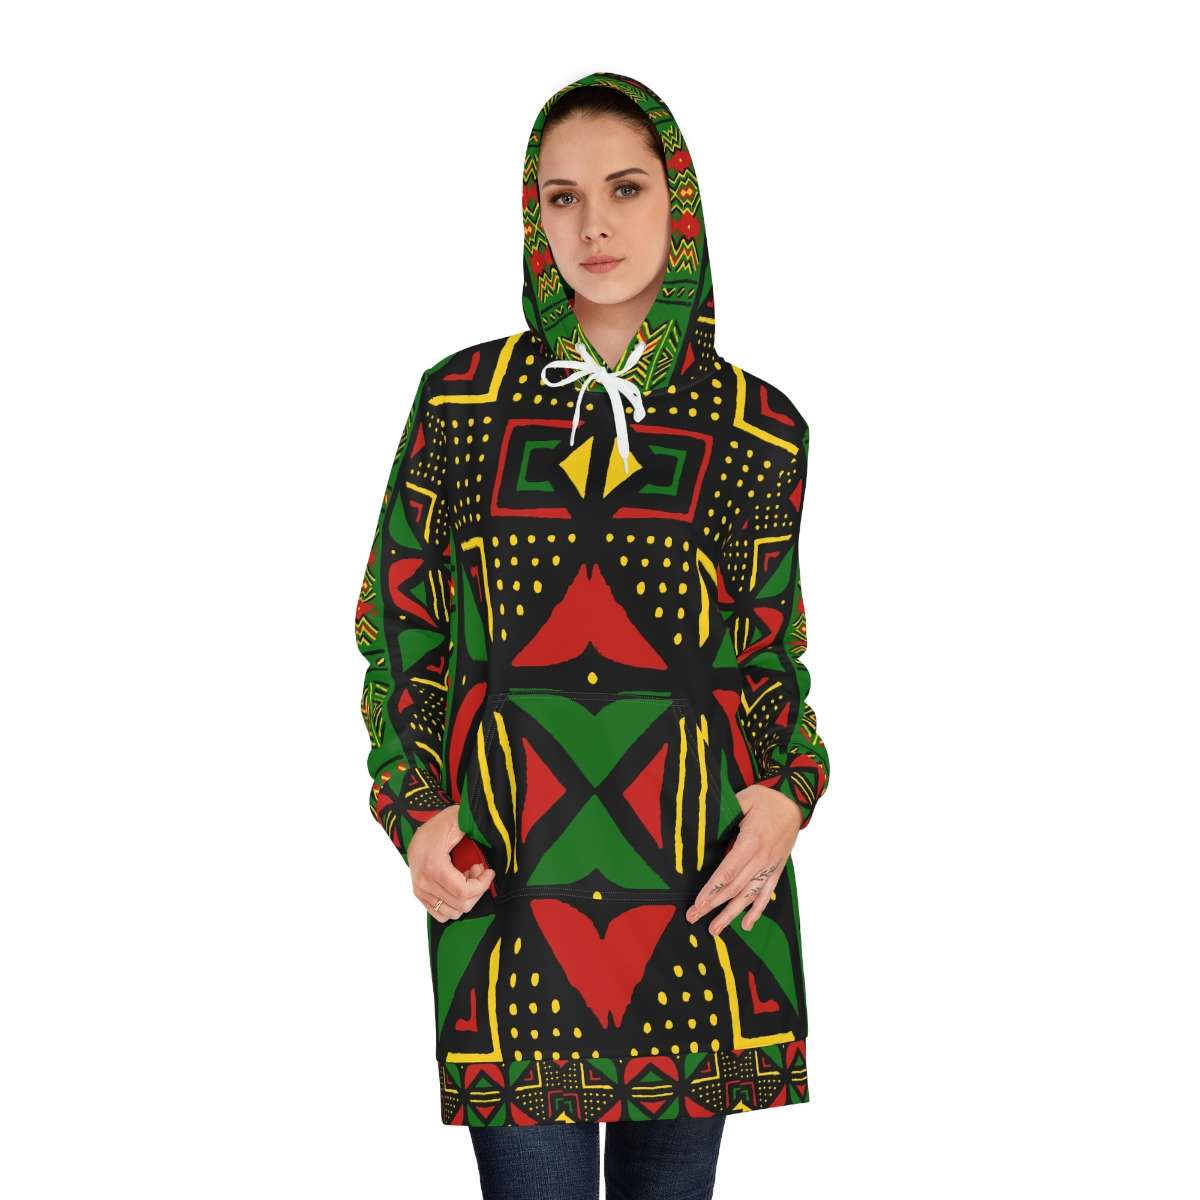 Rasta Africa Hoodie Dress model front view in vibrant reggae colors. Tribal design at Rastaseed original Rasta wear clothing, shoes and accessories.